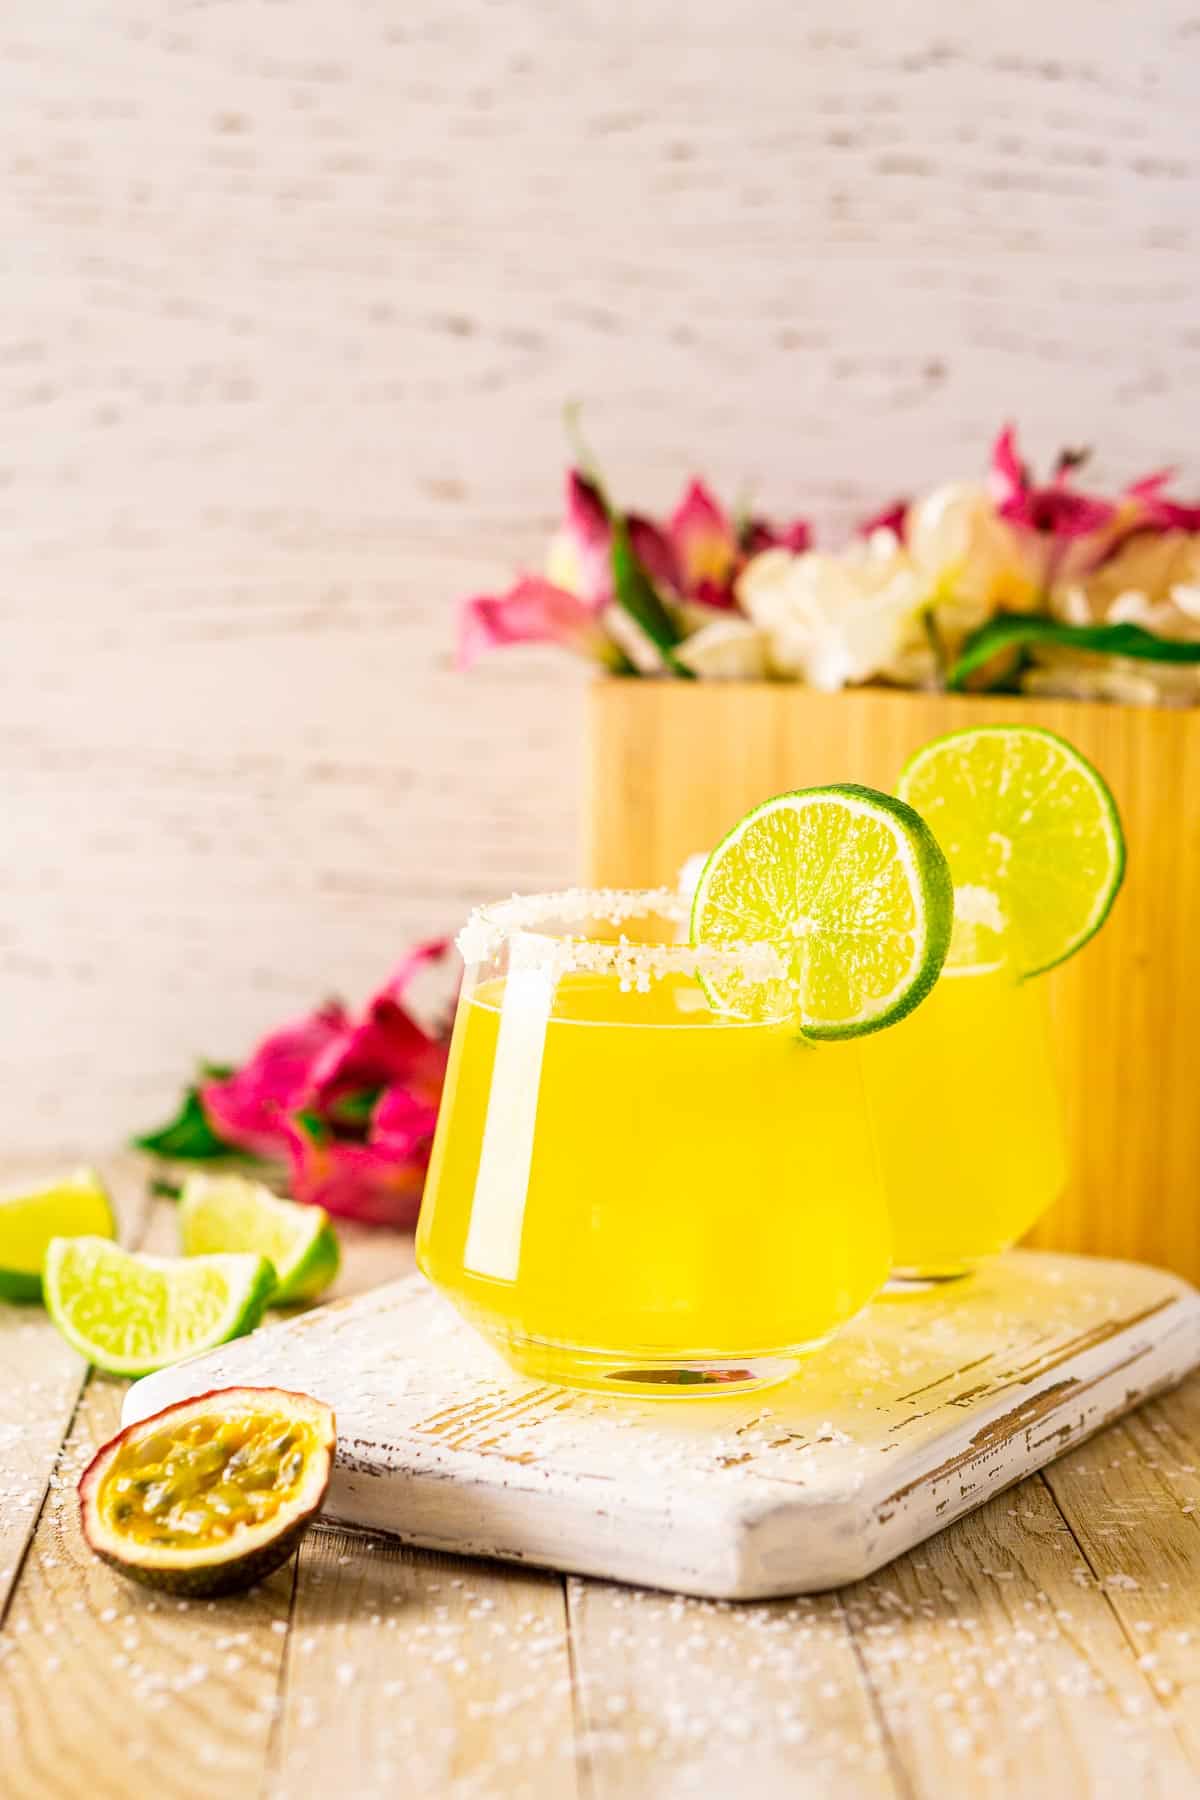 Two passion fruit margaritas on a small white wooden tray with limes and a cut passion fruit on the left.